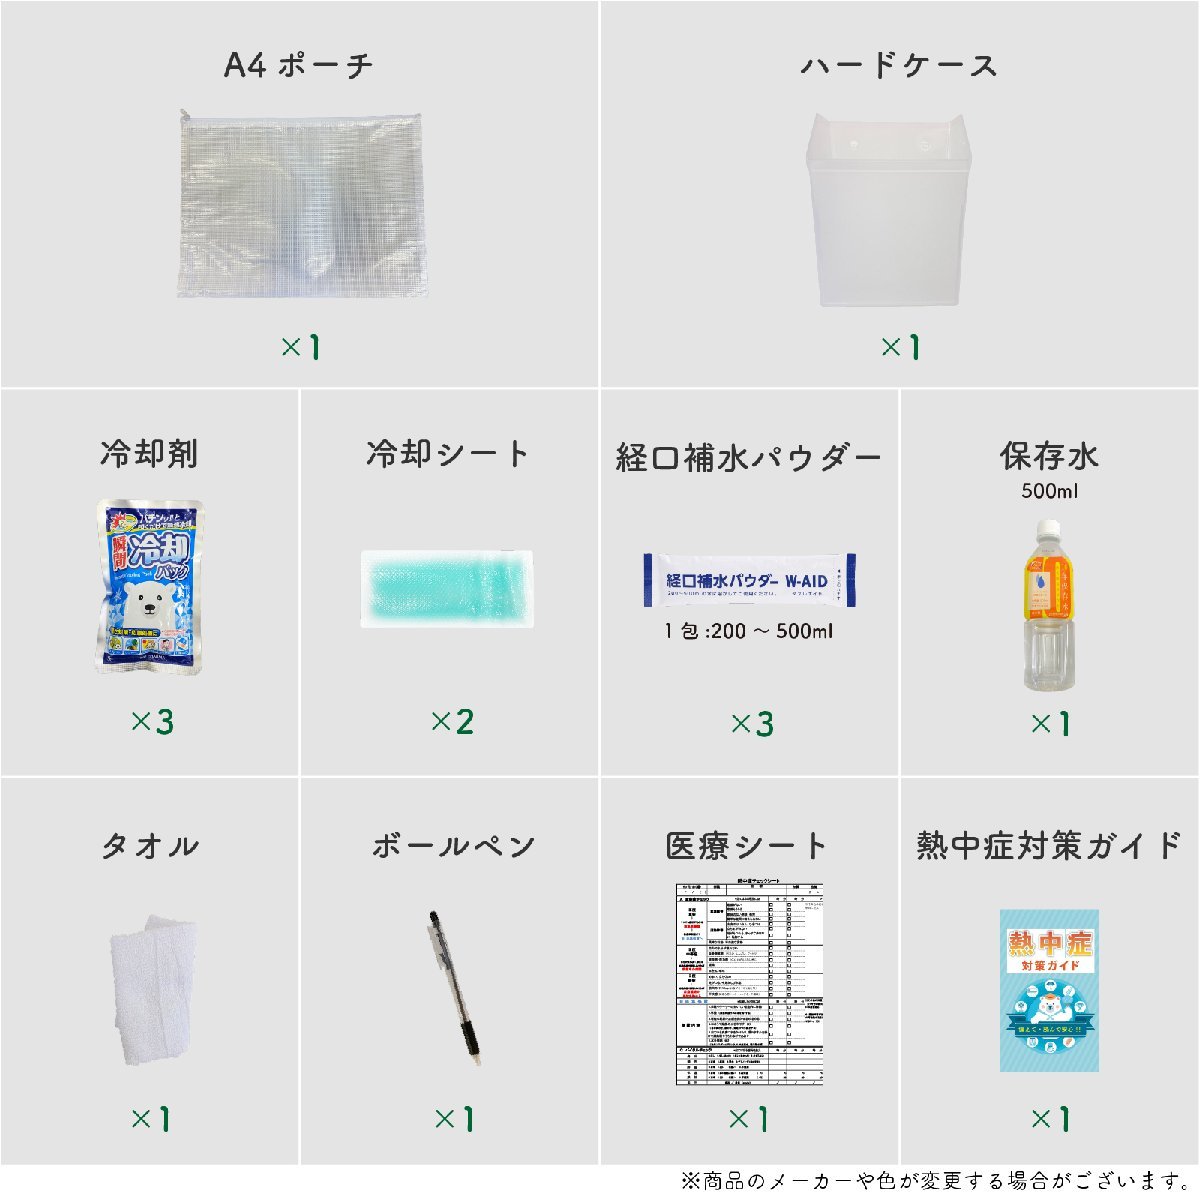 . middle . measures gtsu. middle . prevention slim set [ disaster prevention ...] site construction industry construction site 2023. middle . measures kit oral . water powder 